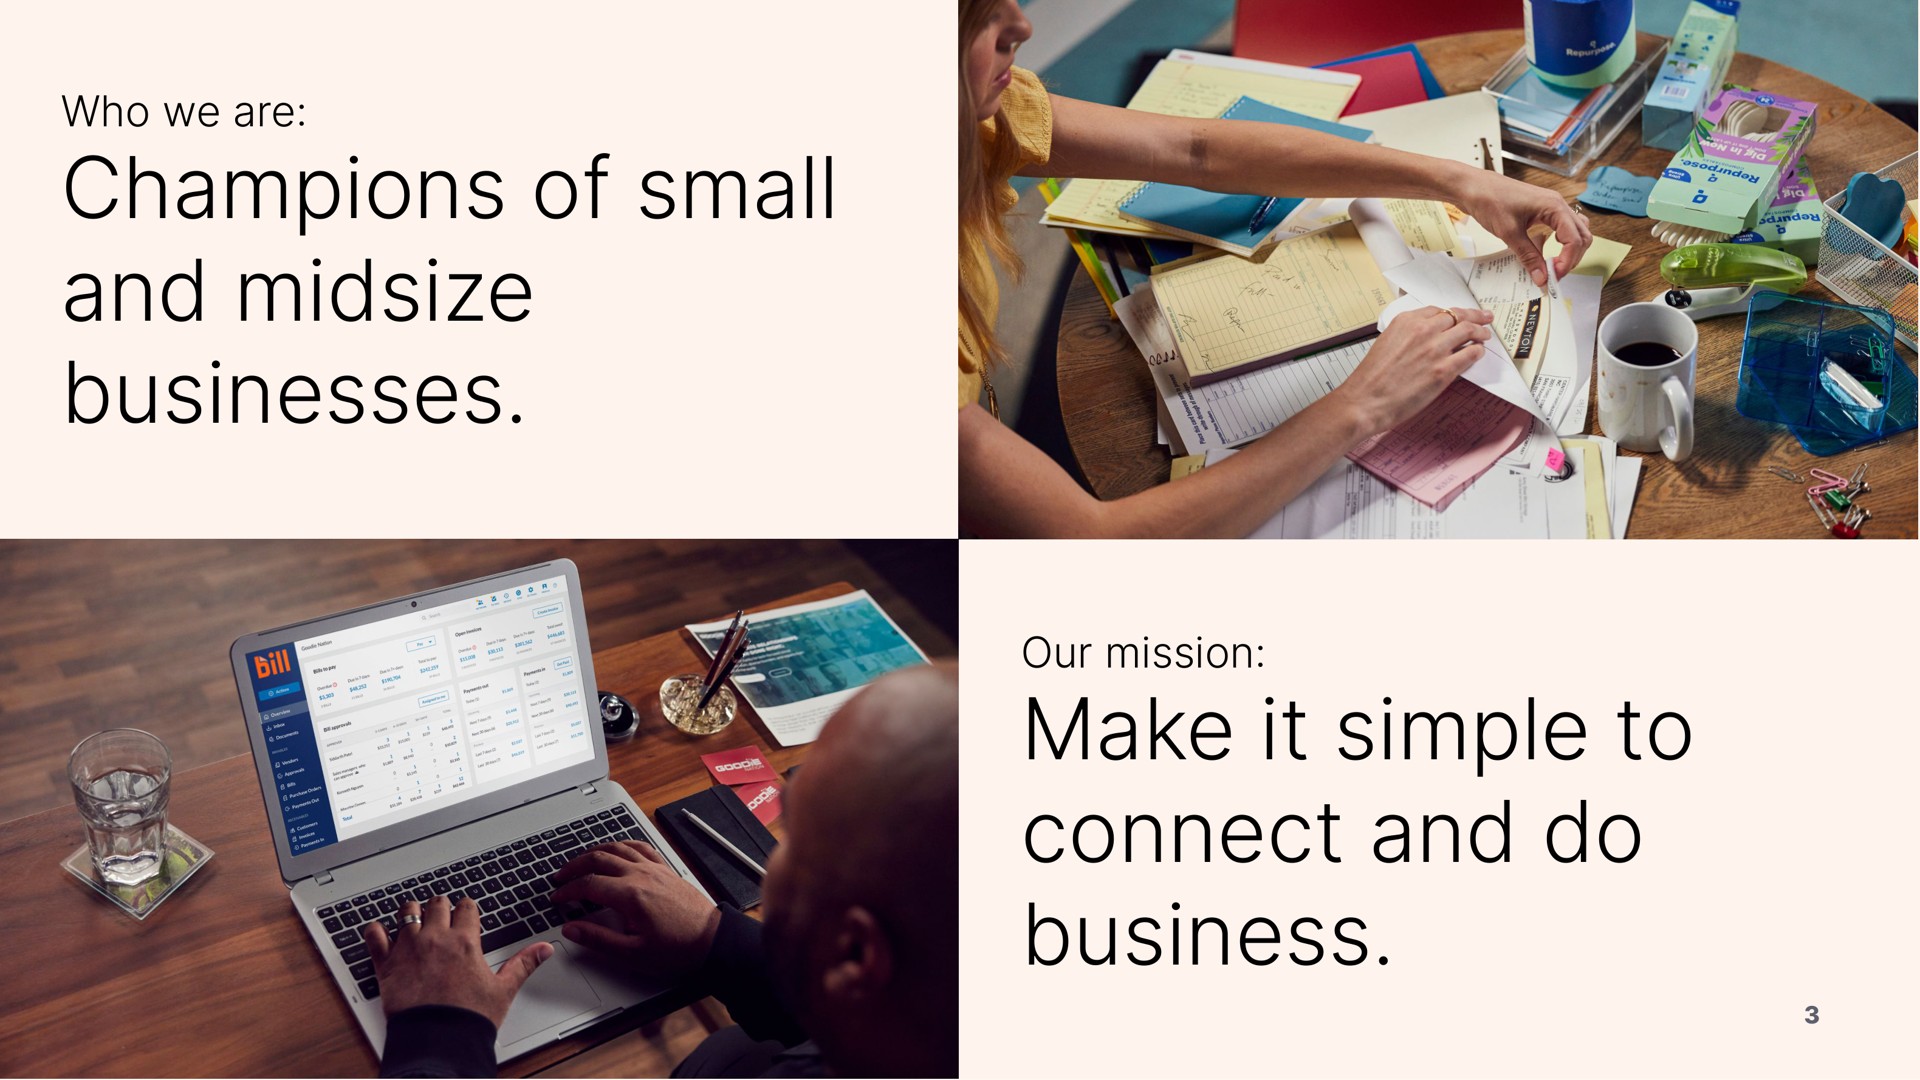 champions of small and businesses make it simple to connect and do business our mission | Bill.com